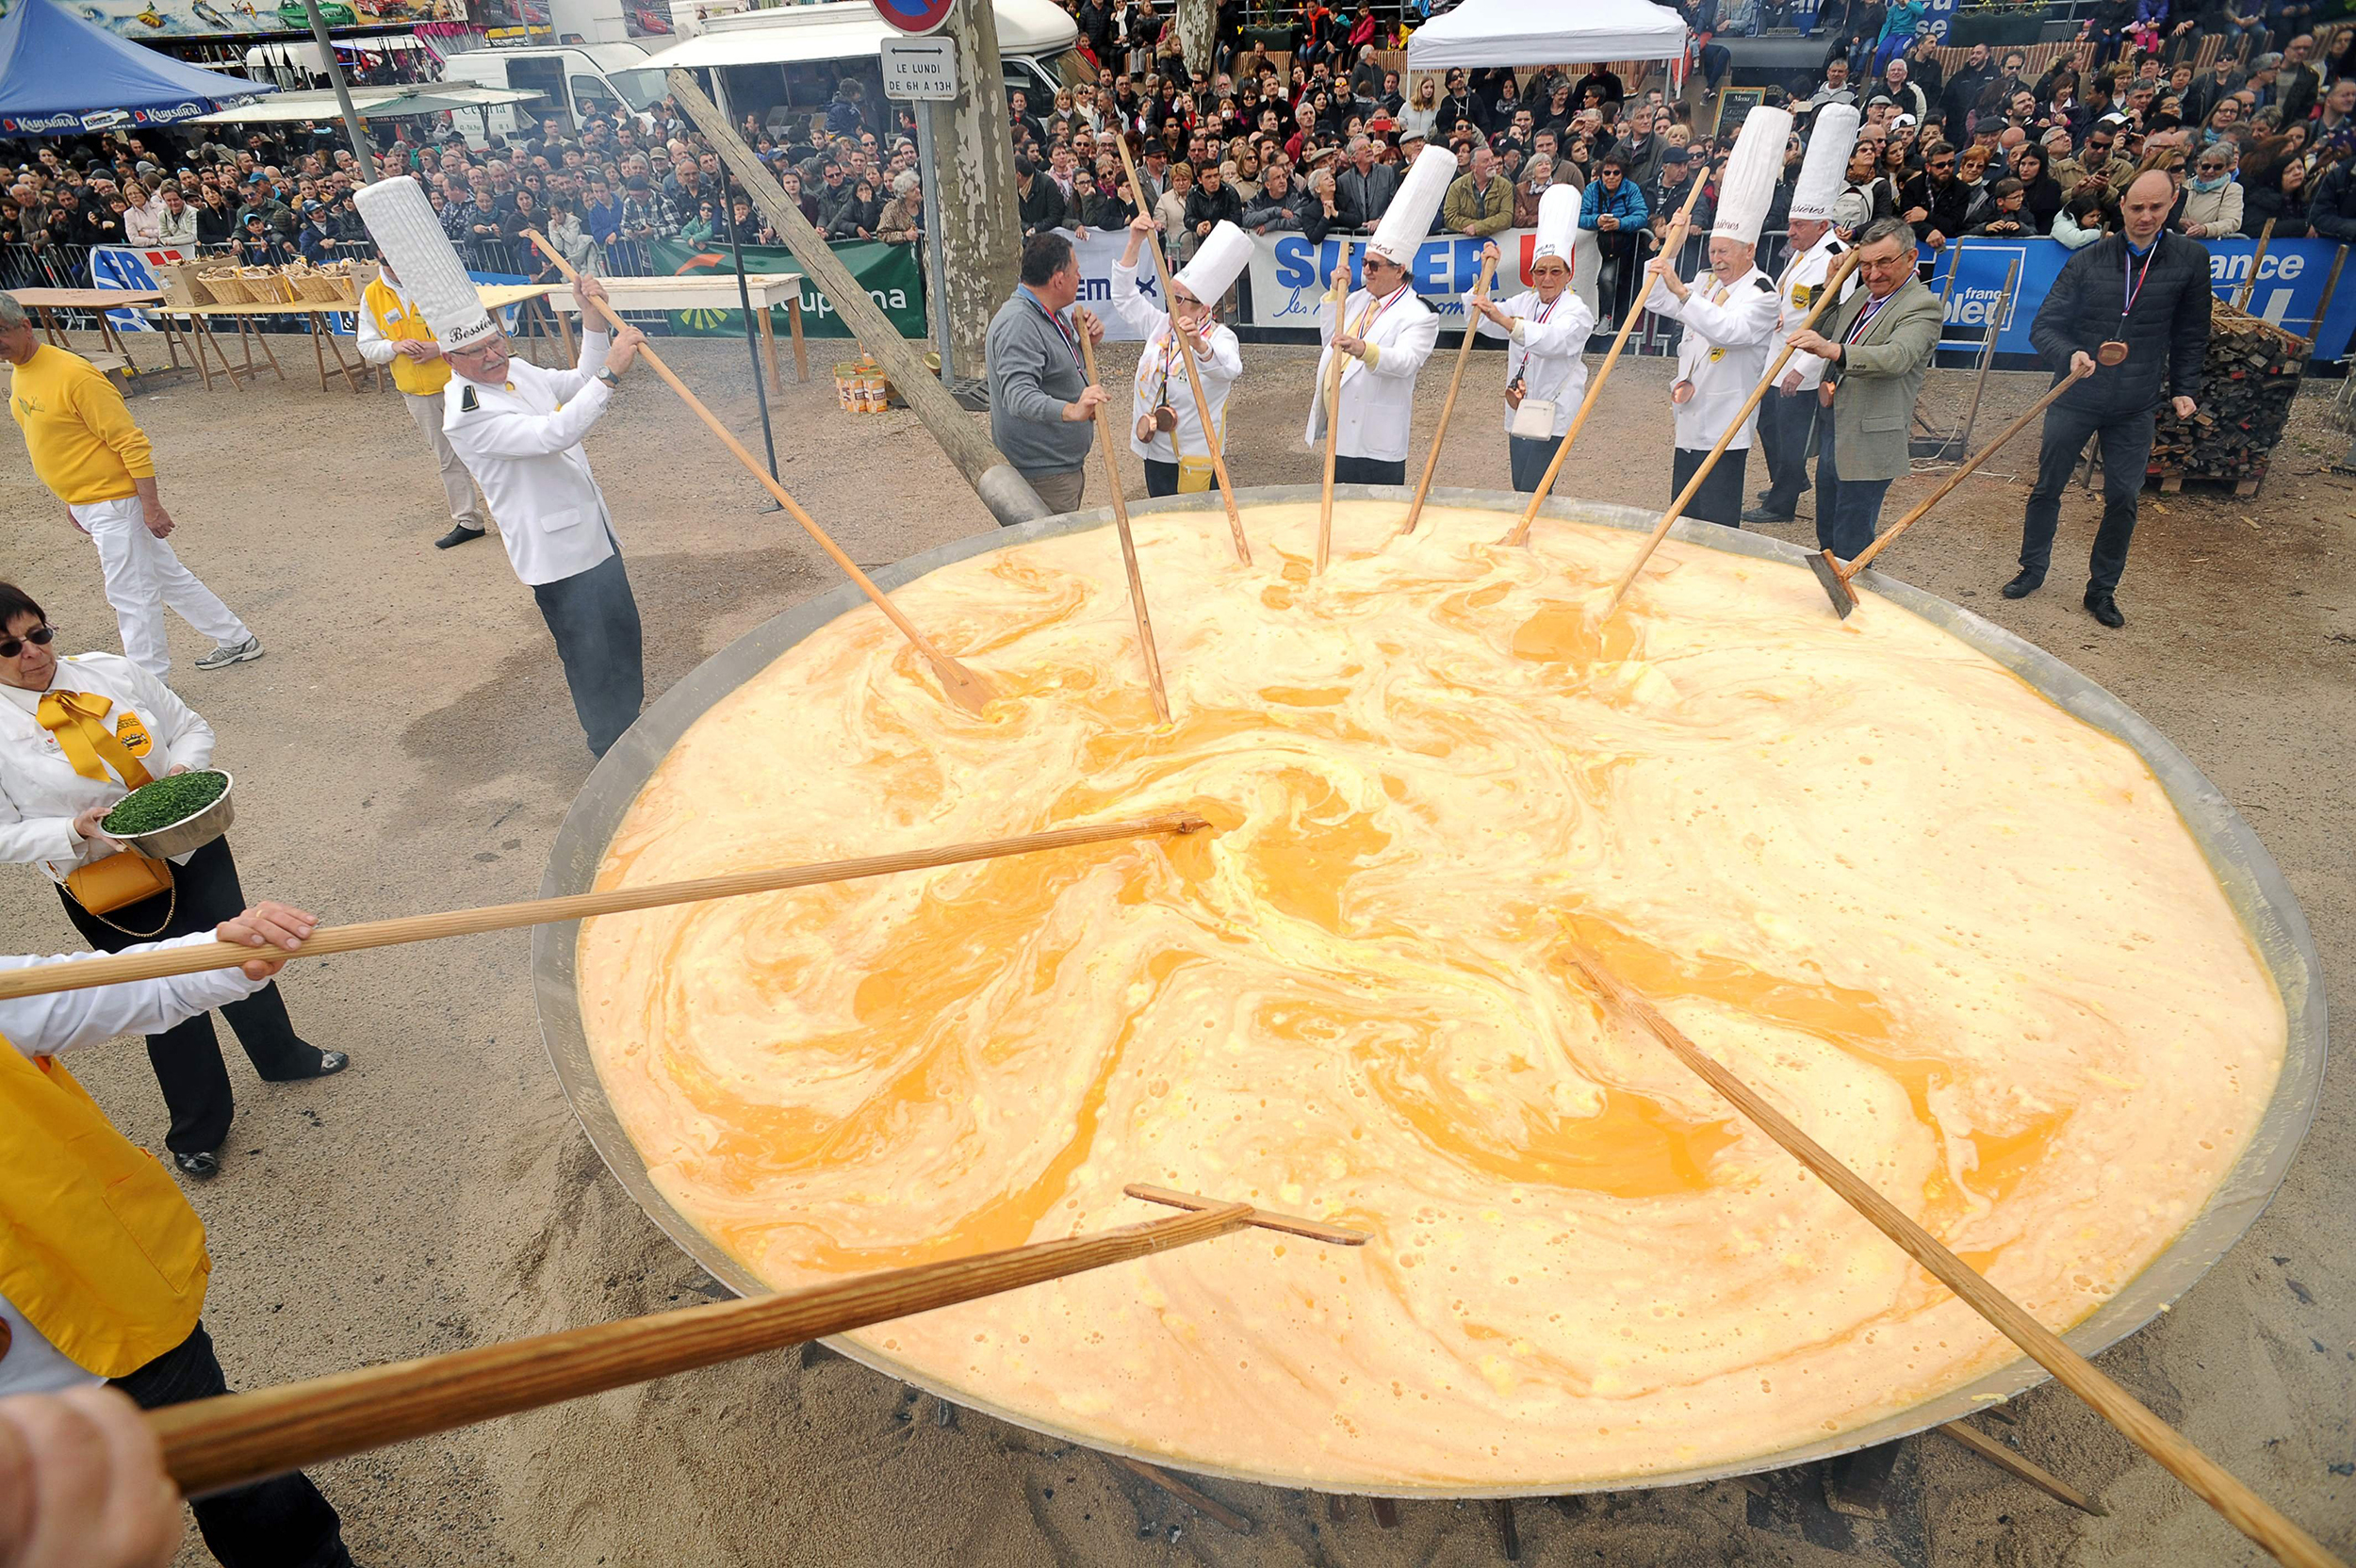 Members of the Giant Omelette Brotherhood of Bessieres cook a giant omelette as part of Easter celebrations in the main square of Bessieres, southern France on March 28, 2016. (Remy Gabalda—AFP/Getty Images)